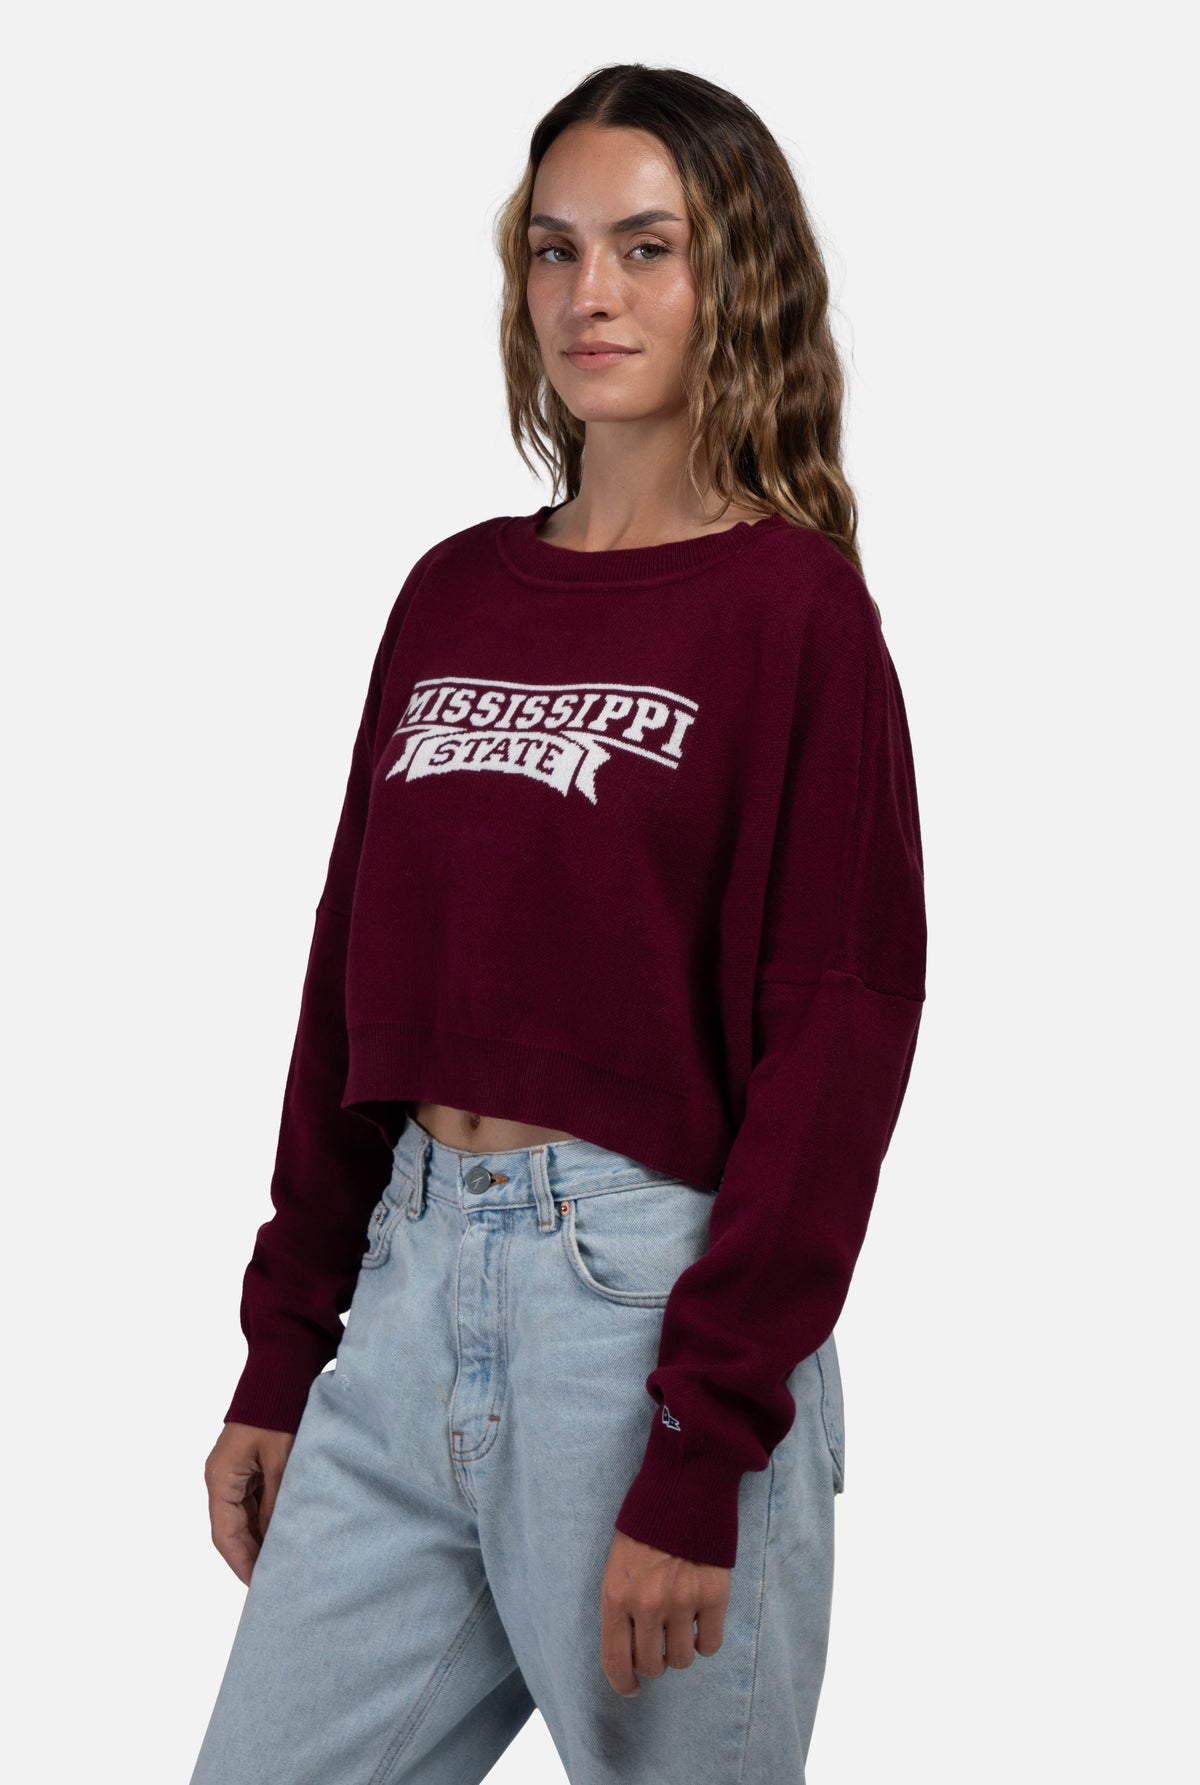 Mississippi State Ivy Knitted Sweater